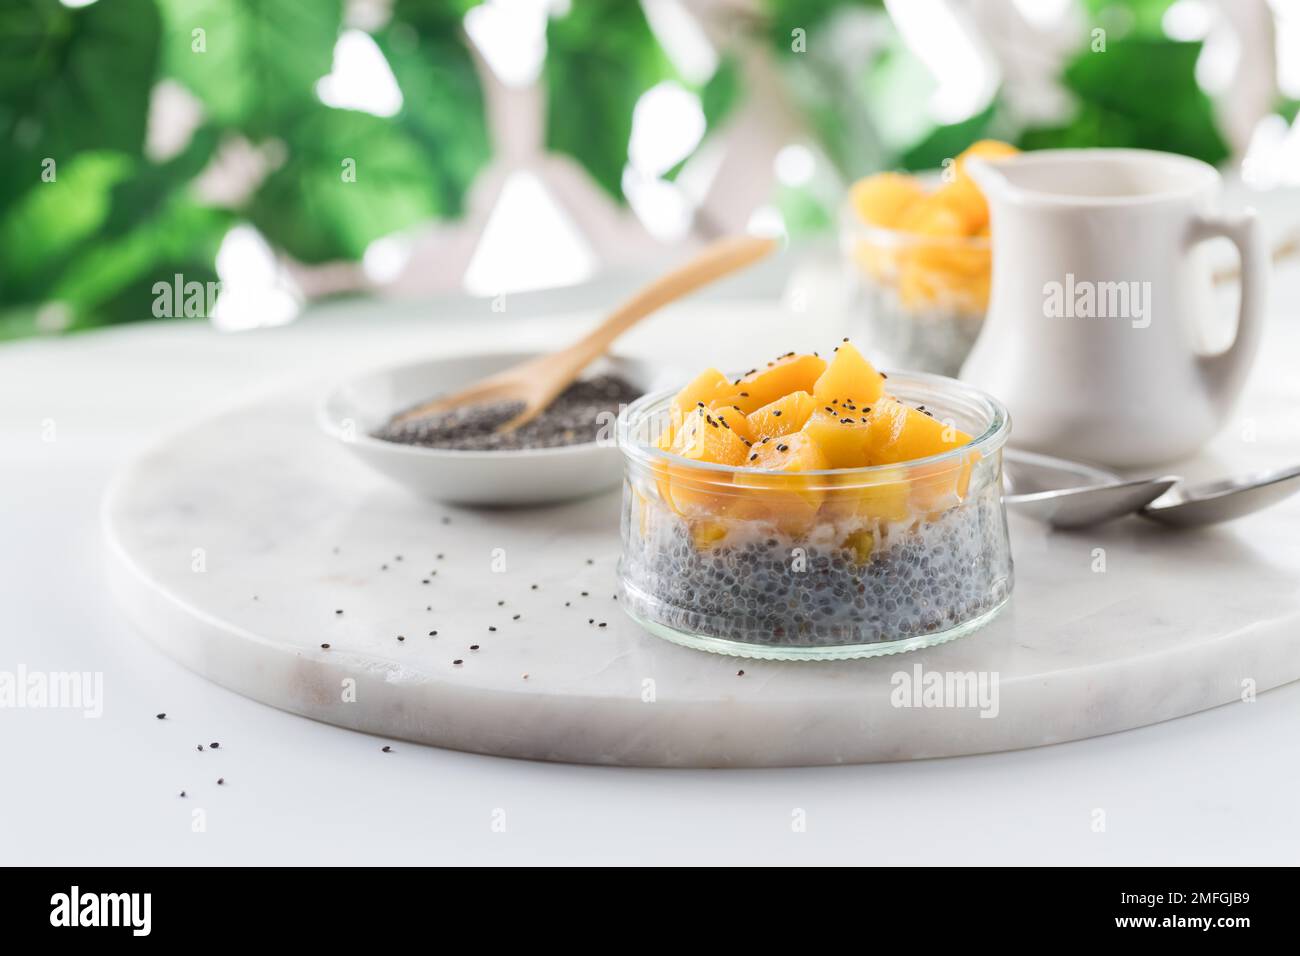 Chia pudding topped with chopped mango pieces against a blurred background. Stock Photo